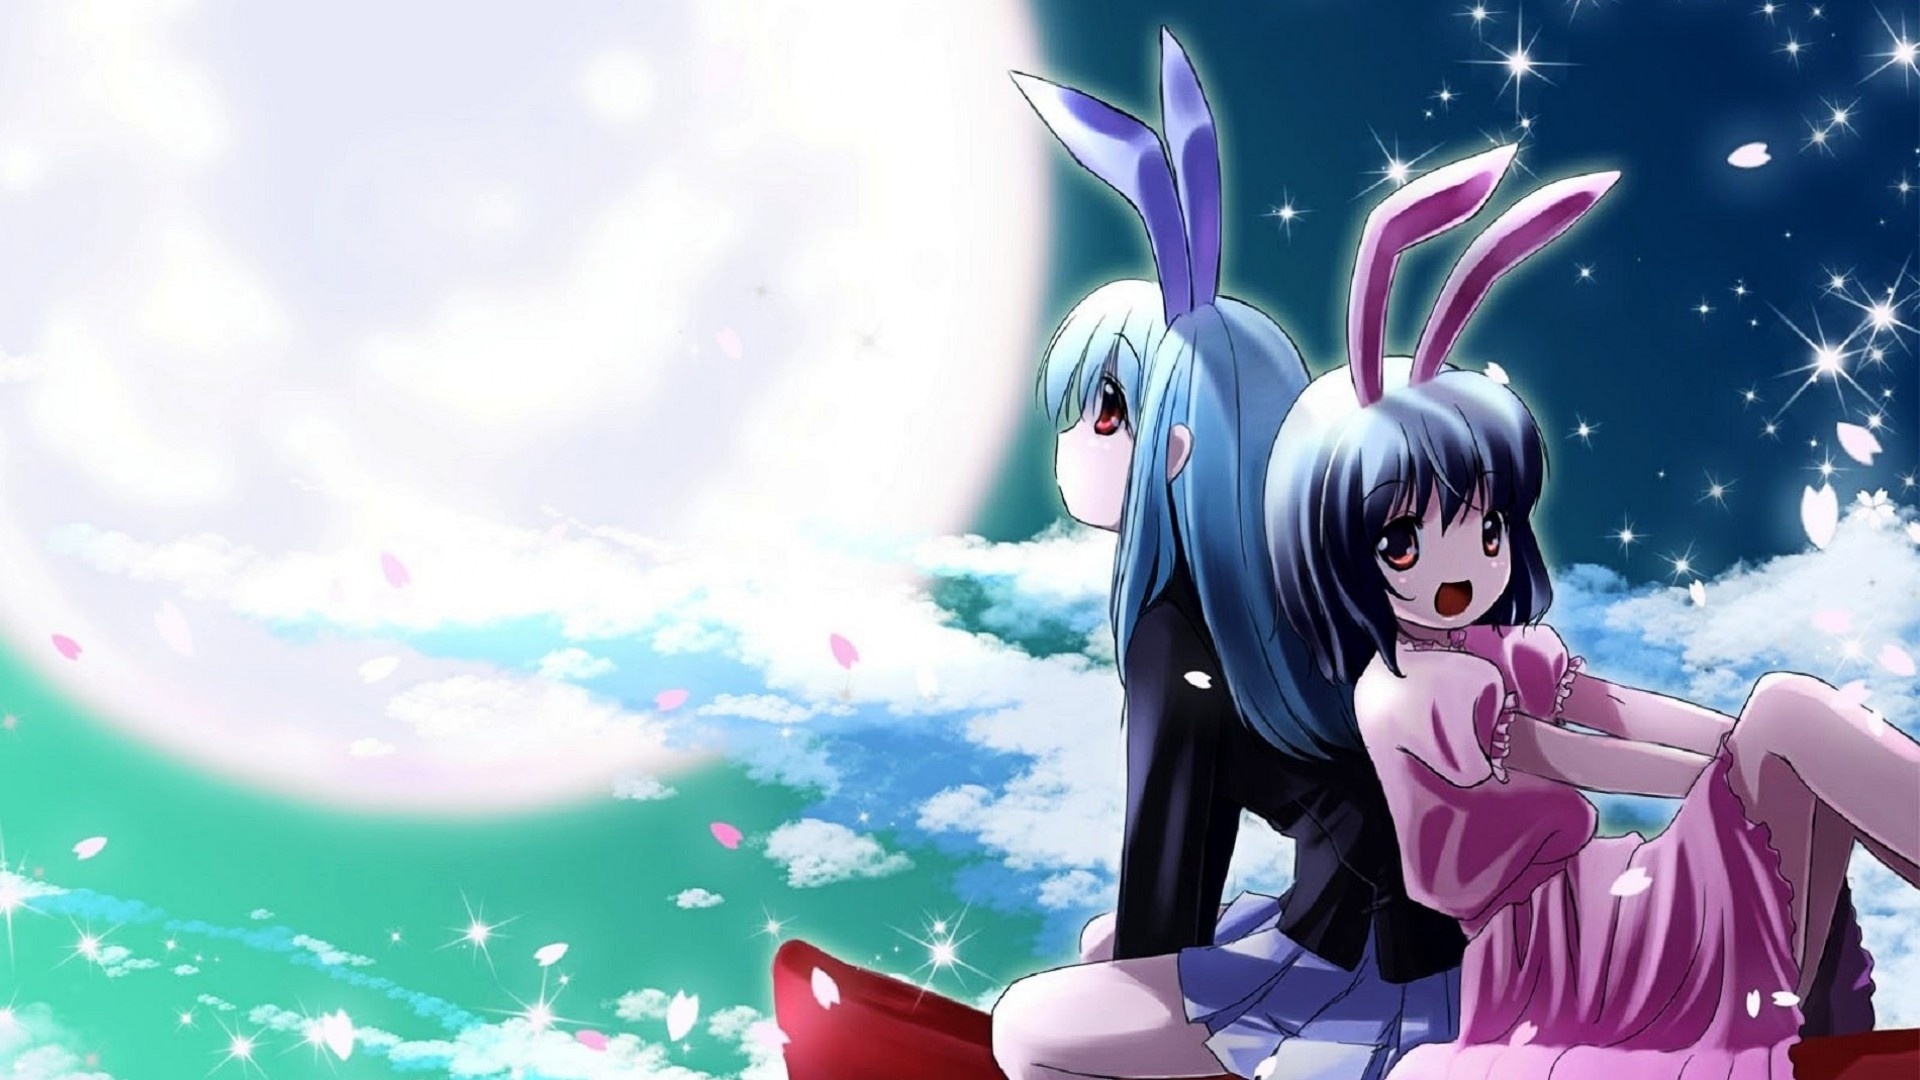 Moving Anime Wallpaper - Animated Anime Wallpaper Download , HD Wallpaper & Backgrounds